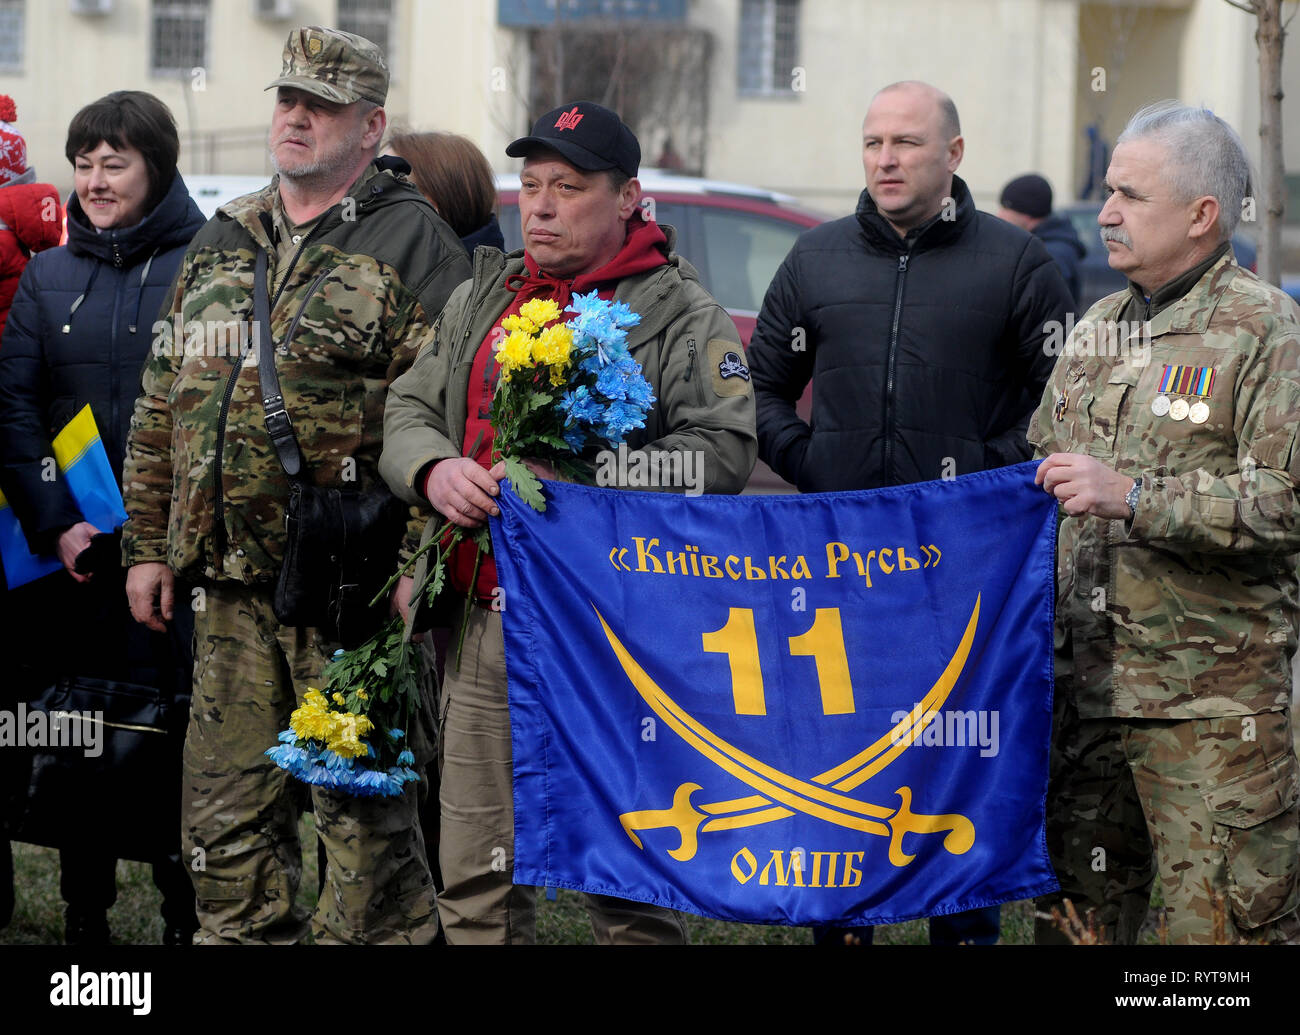 Volunteers are seen holding a flag of the 11th separate motorized infantry battalion 'Kievan Rus' during the celebrations to mark the Day of the Ukrainian Volunteer in Kiev. Ukraine celebrates Volunteer Day, which was founded in honor of citizens who voluntarily decided to protect the state from Russian aggression. It was on this day five years ago that the first 500 volunteers from the “Self-Defense of Maidan” social movement arrived at the Novye Petrivtsi training ground to form a volunteer battalion, which relocated to the Dnipropetrovsk region in early April 2014 and was named Dnipro-2. Th Stock Photo